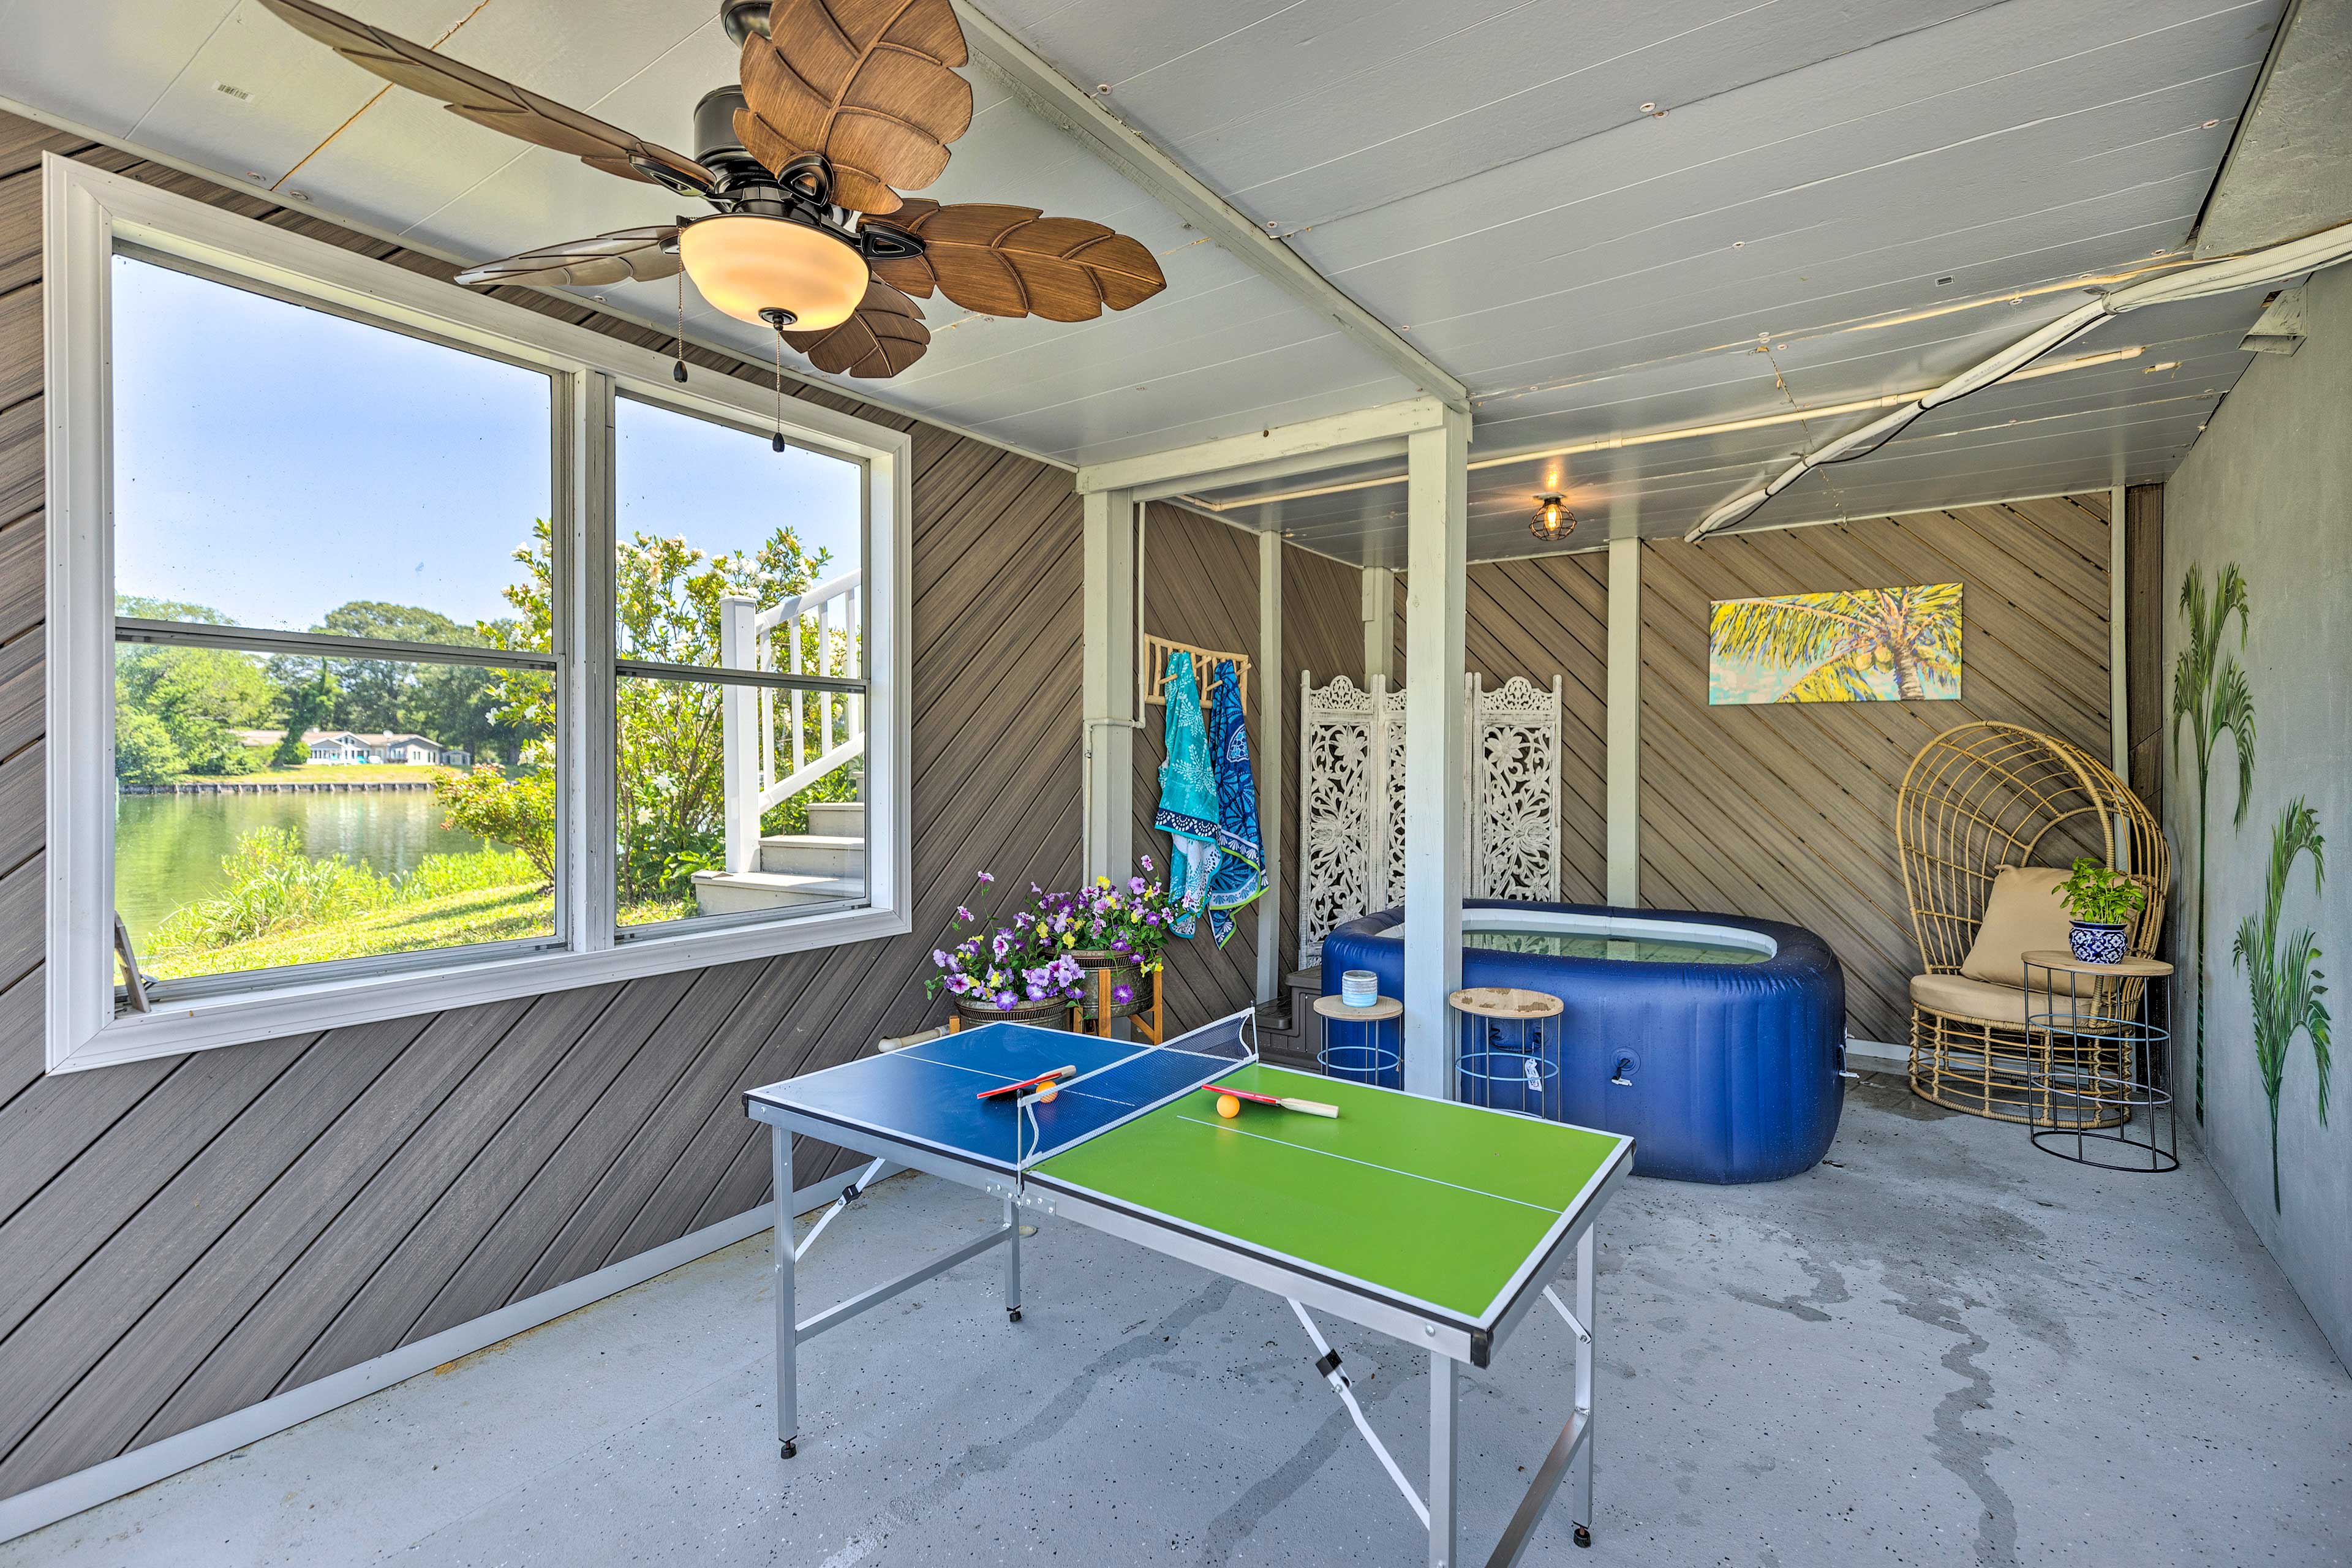 Covered Patio | Private Hot Tub (Not Currently Functional)